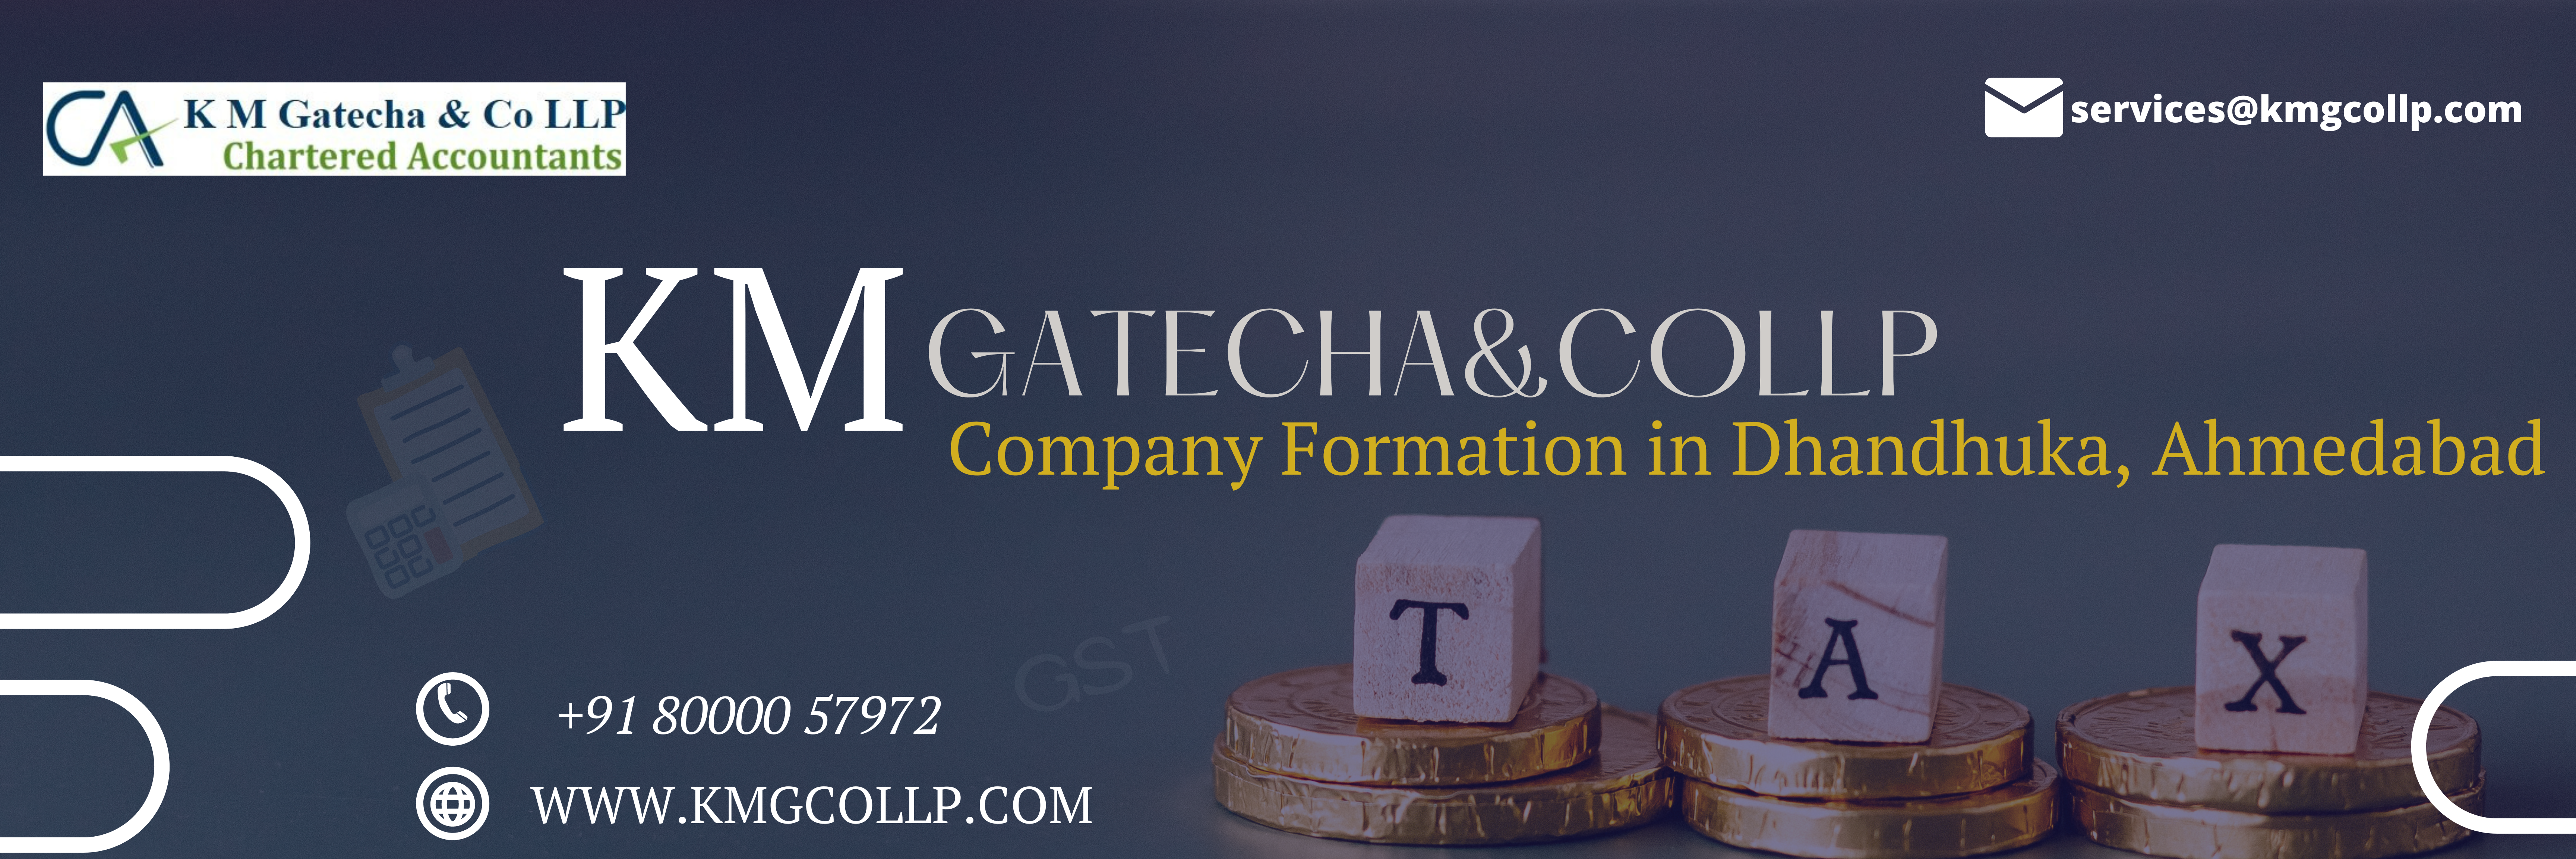 Company Formation in Dhandhuka